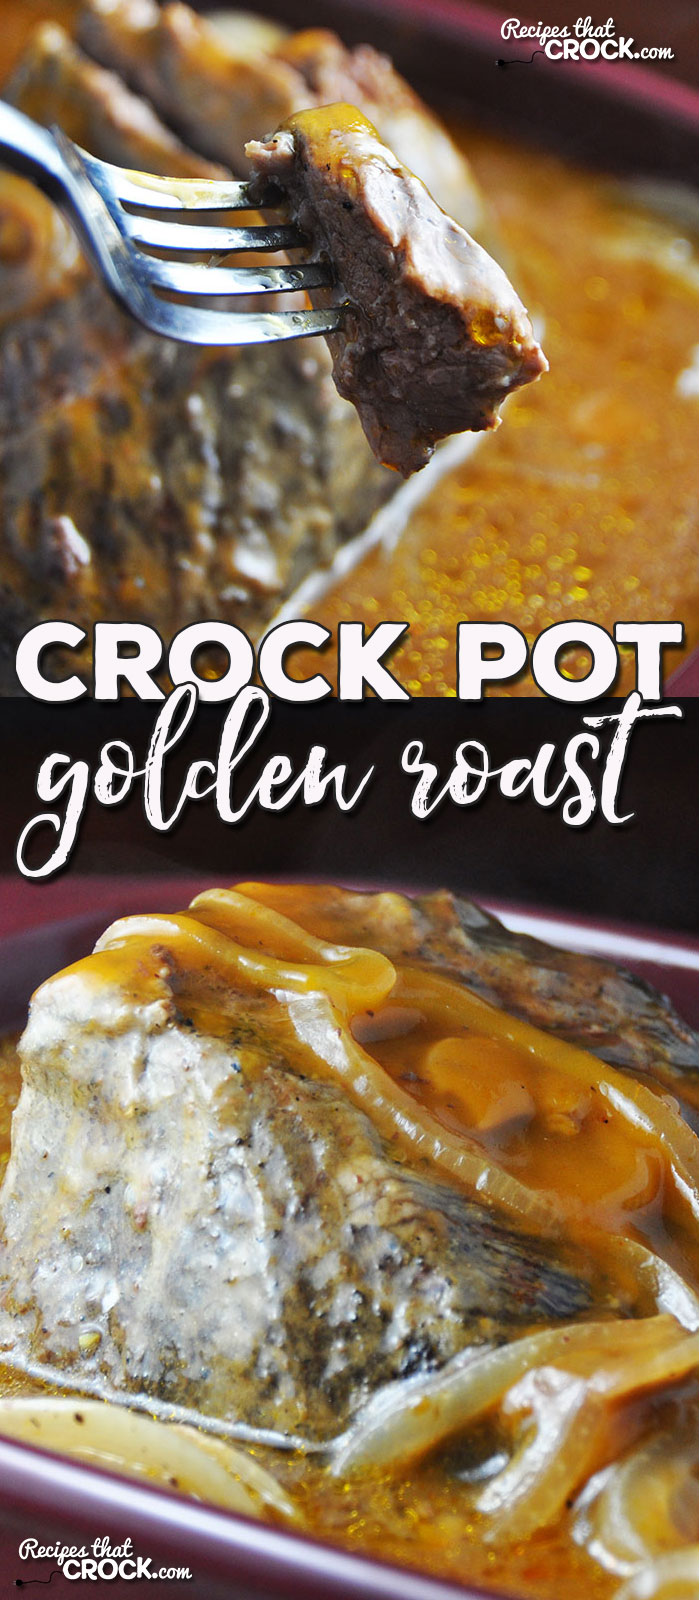 If you love an easy and delicious recipe, then you don't want to miss this Golden Crock Pot Roast. Your friends and family will love the wonderful flavor of the roast and the gravy!